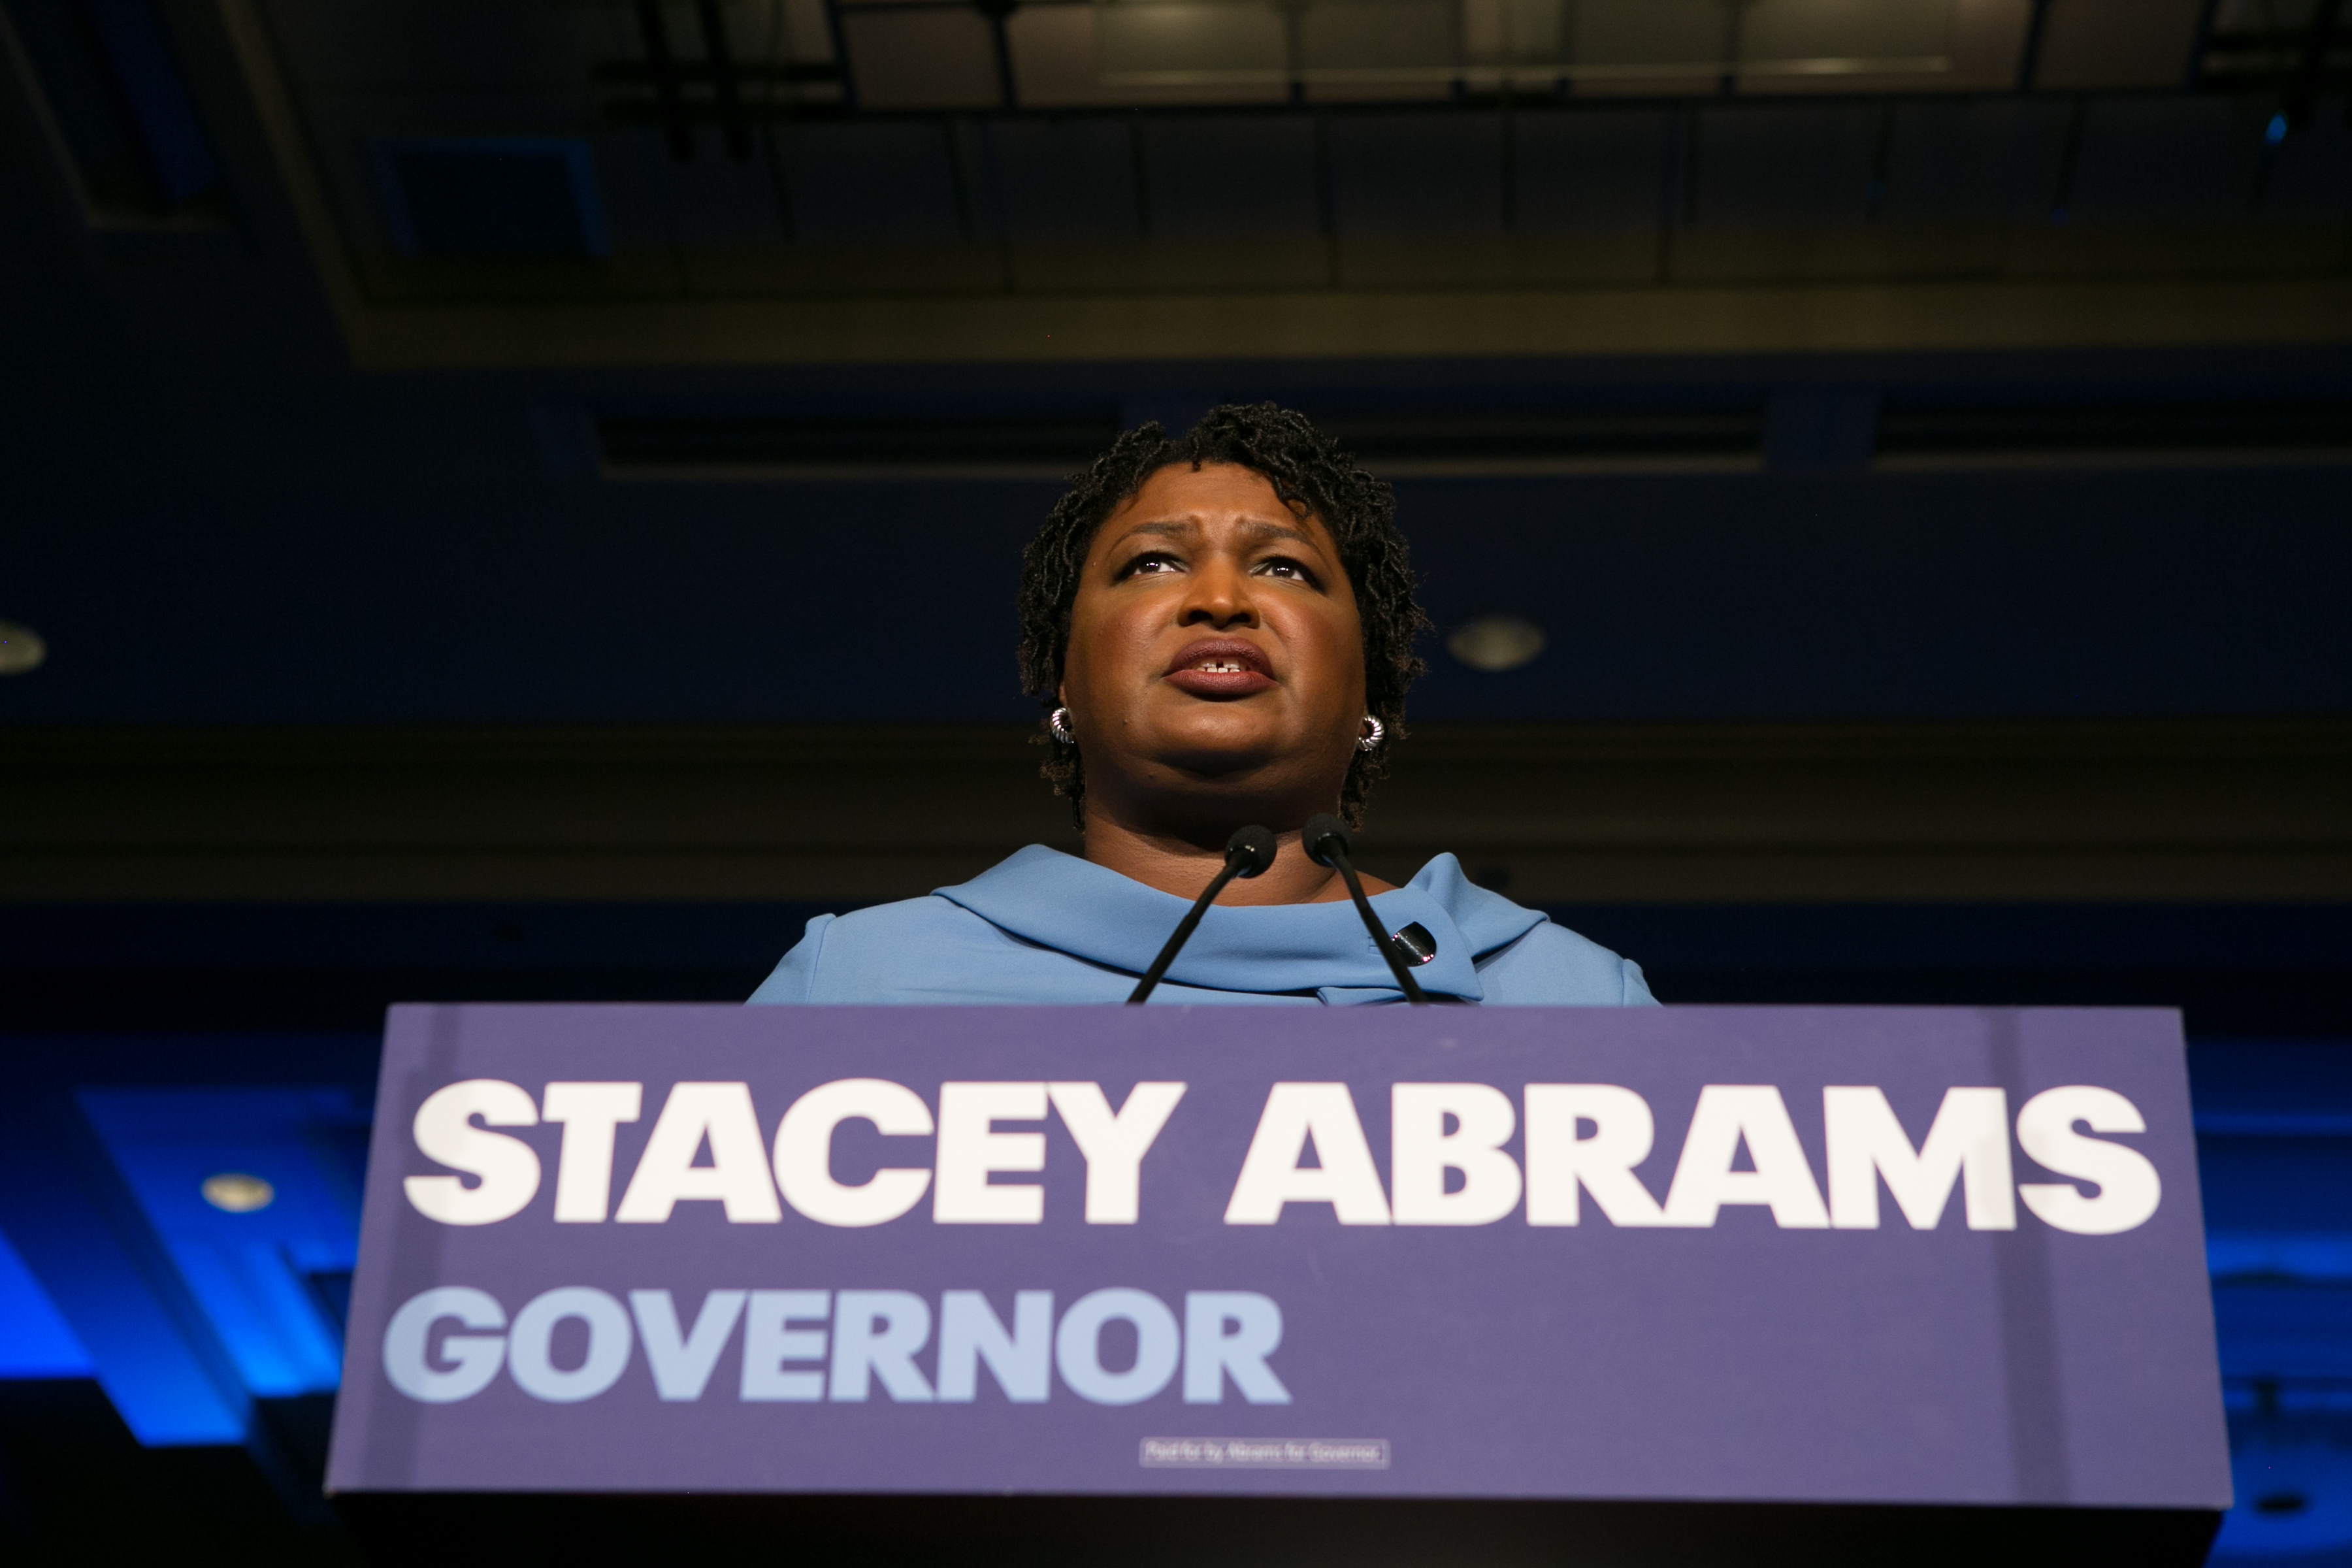 Democratic Gubernatorial candidate Stacey Abrams addresses supporters at an election watch party on November 6, 2018 in Atlanta, Georgia. (Jessica McGowan/Getty Images)